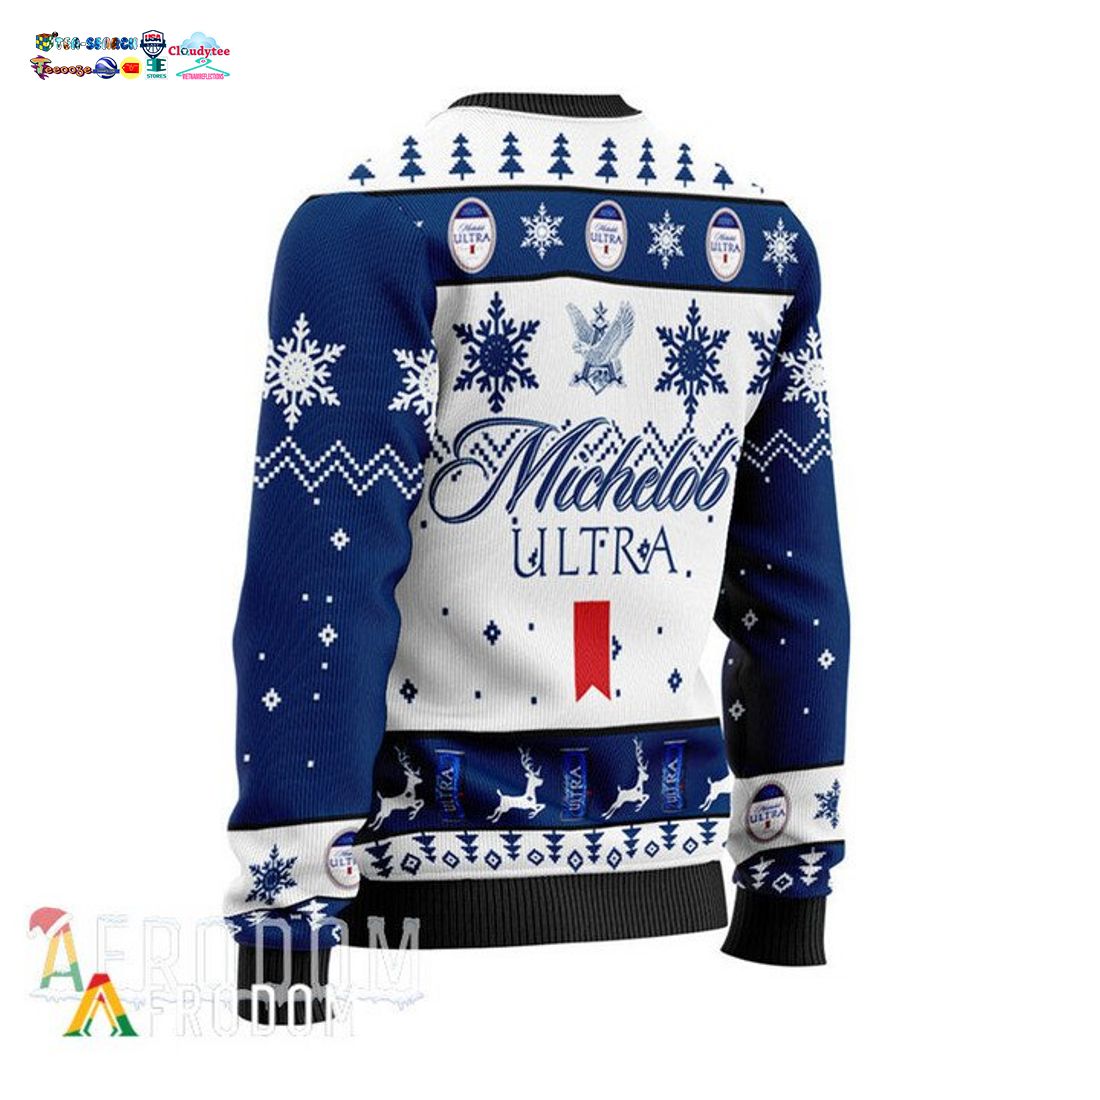 Michelob Ultra Ver 3 Ugly Christmas Sweater